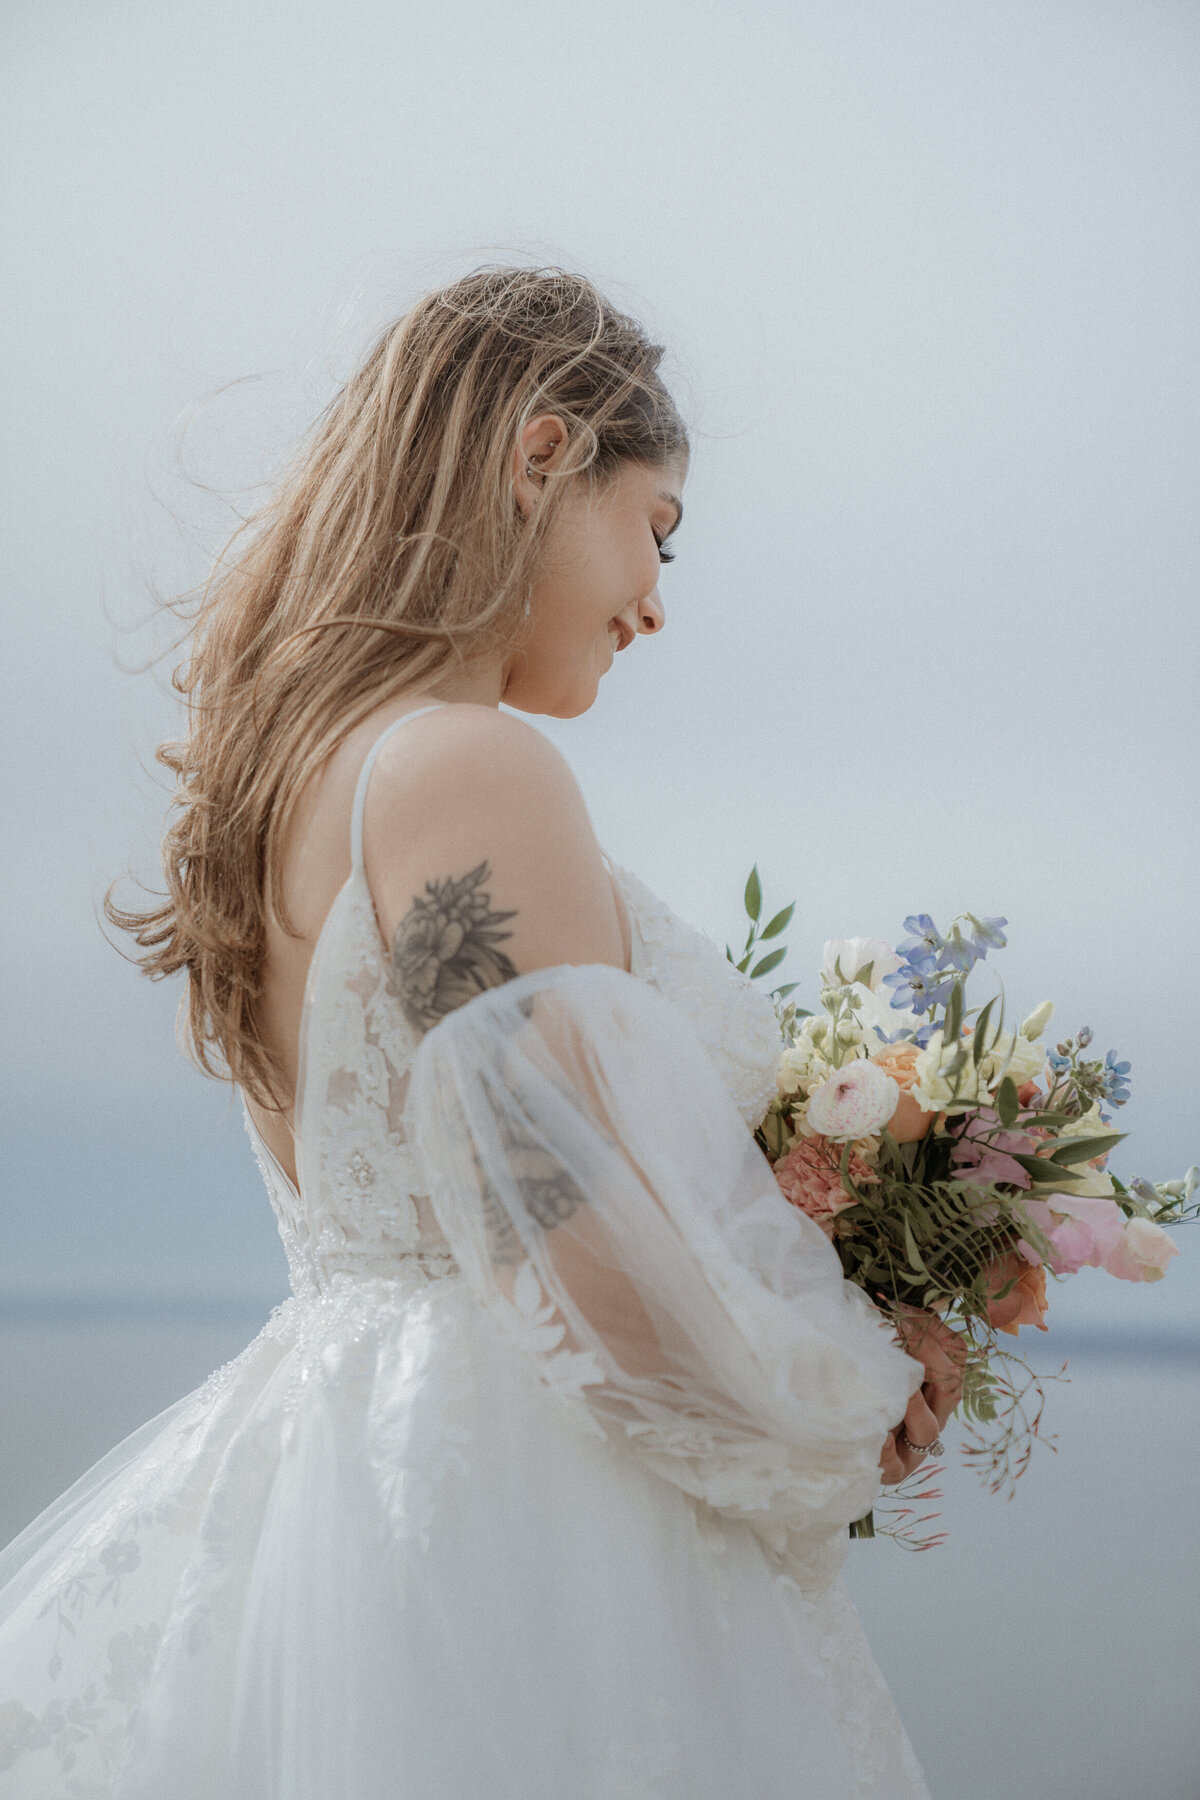 Cristal-Esteban-Elopement-at-Discovery-Park-in-Seattle-Amy-Law-Photography-42